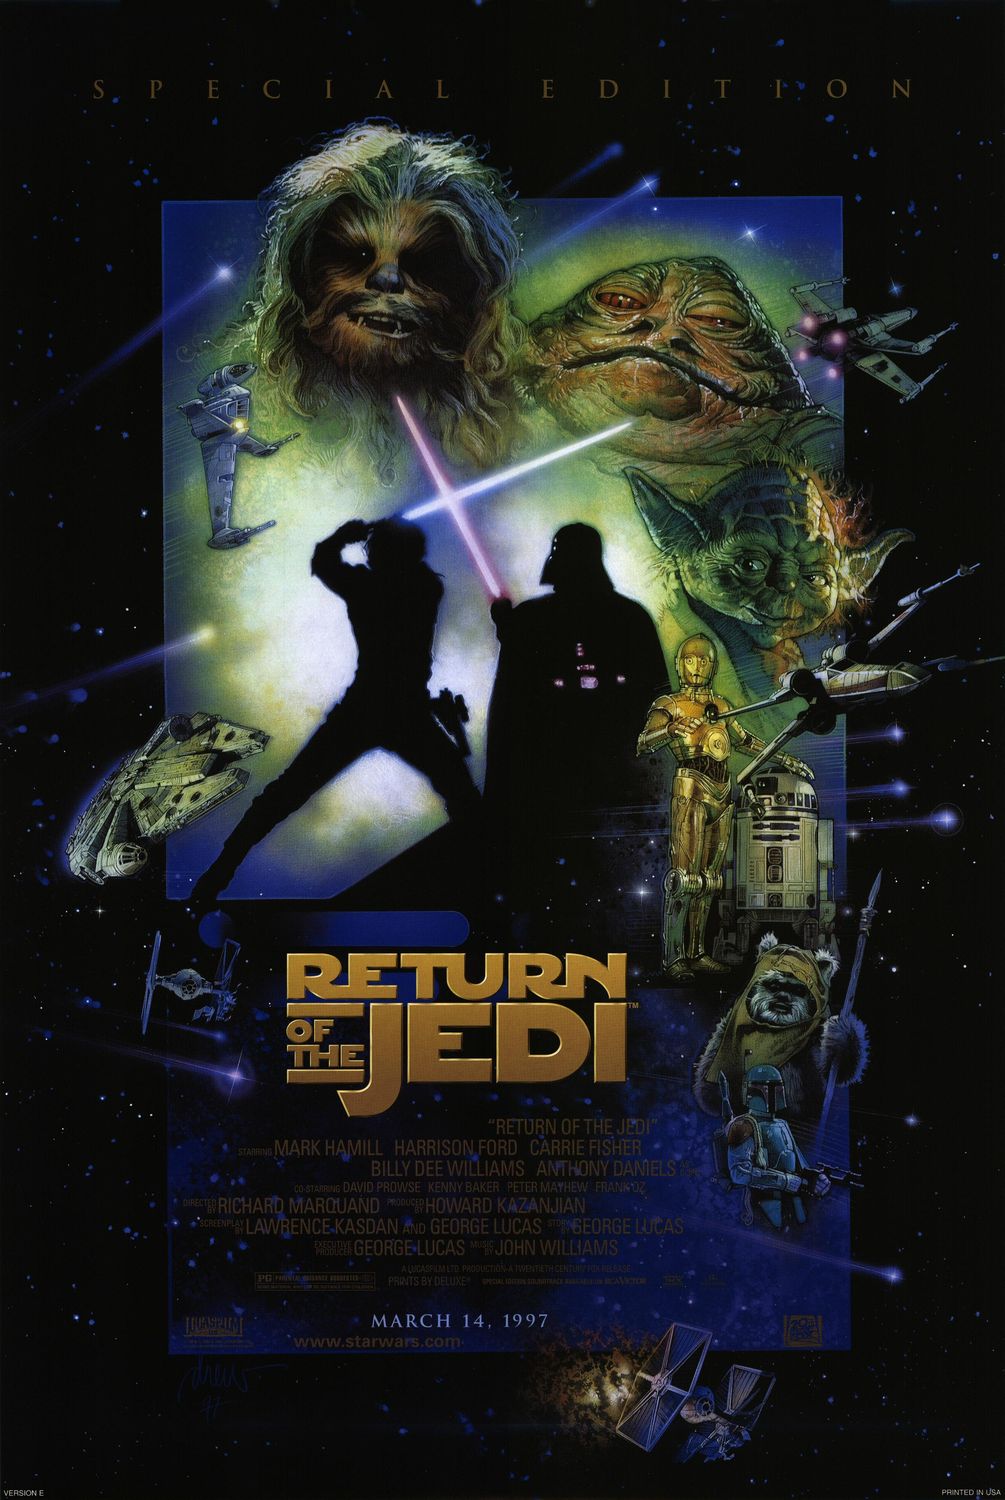 star wars return of the jedi poster - S. D C G Return "Return Of The Jedi" mMARK Hamill Harrison Ford Carrie Fisher Billy Dee Williams Anthony Daniels O Starring David Prowse Kenny Baker Peter Mayhew Fransuz The Directen Richard Marquand Produced Howard K